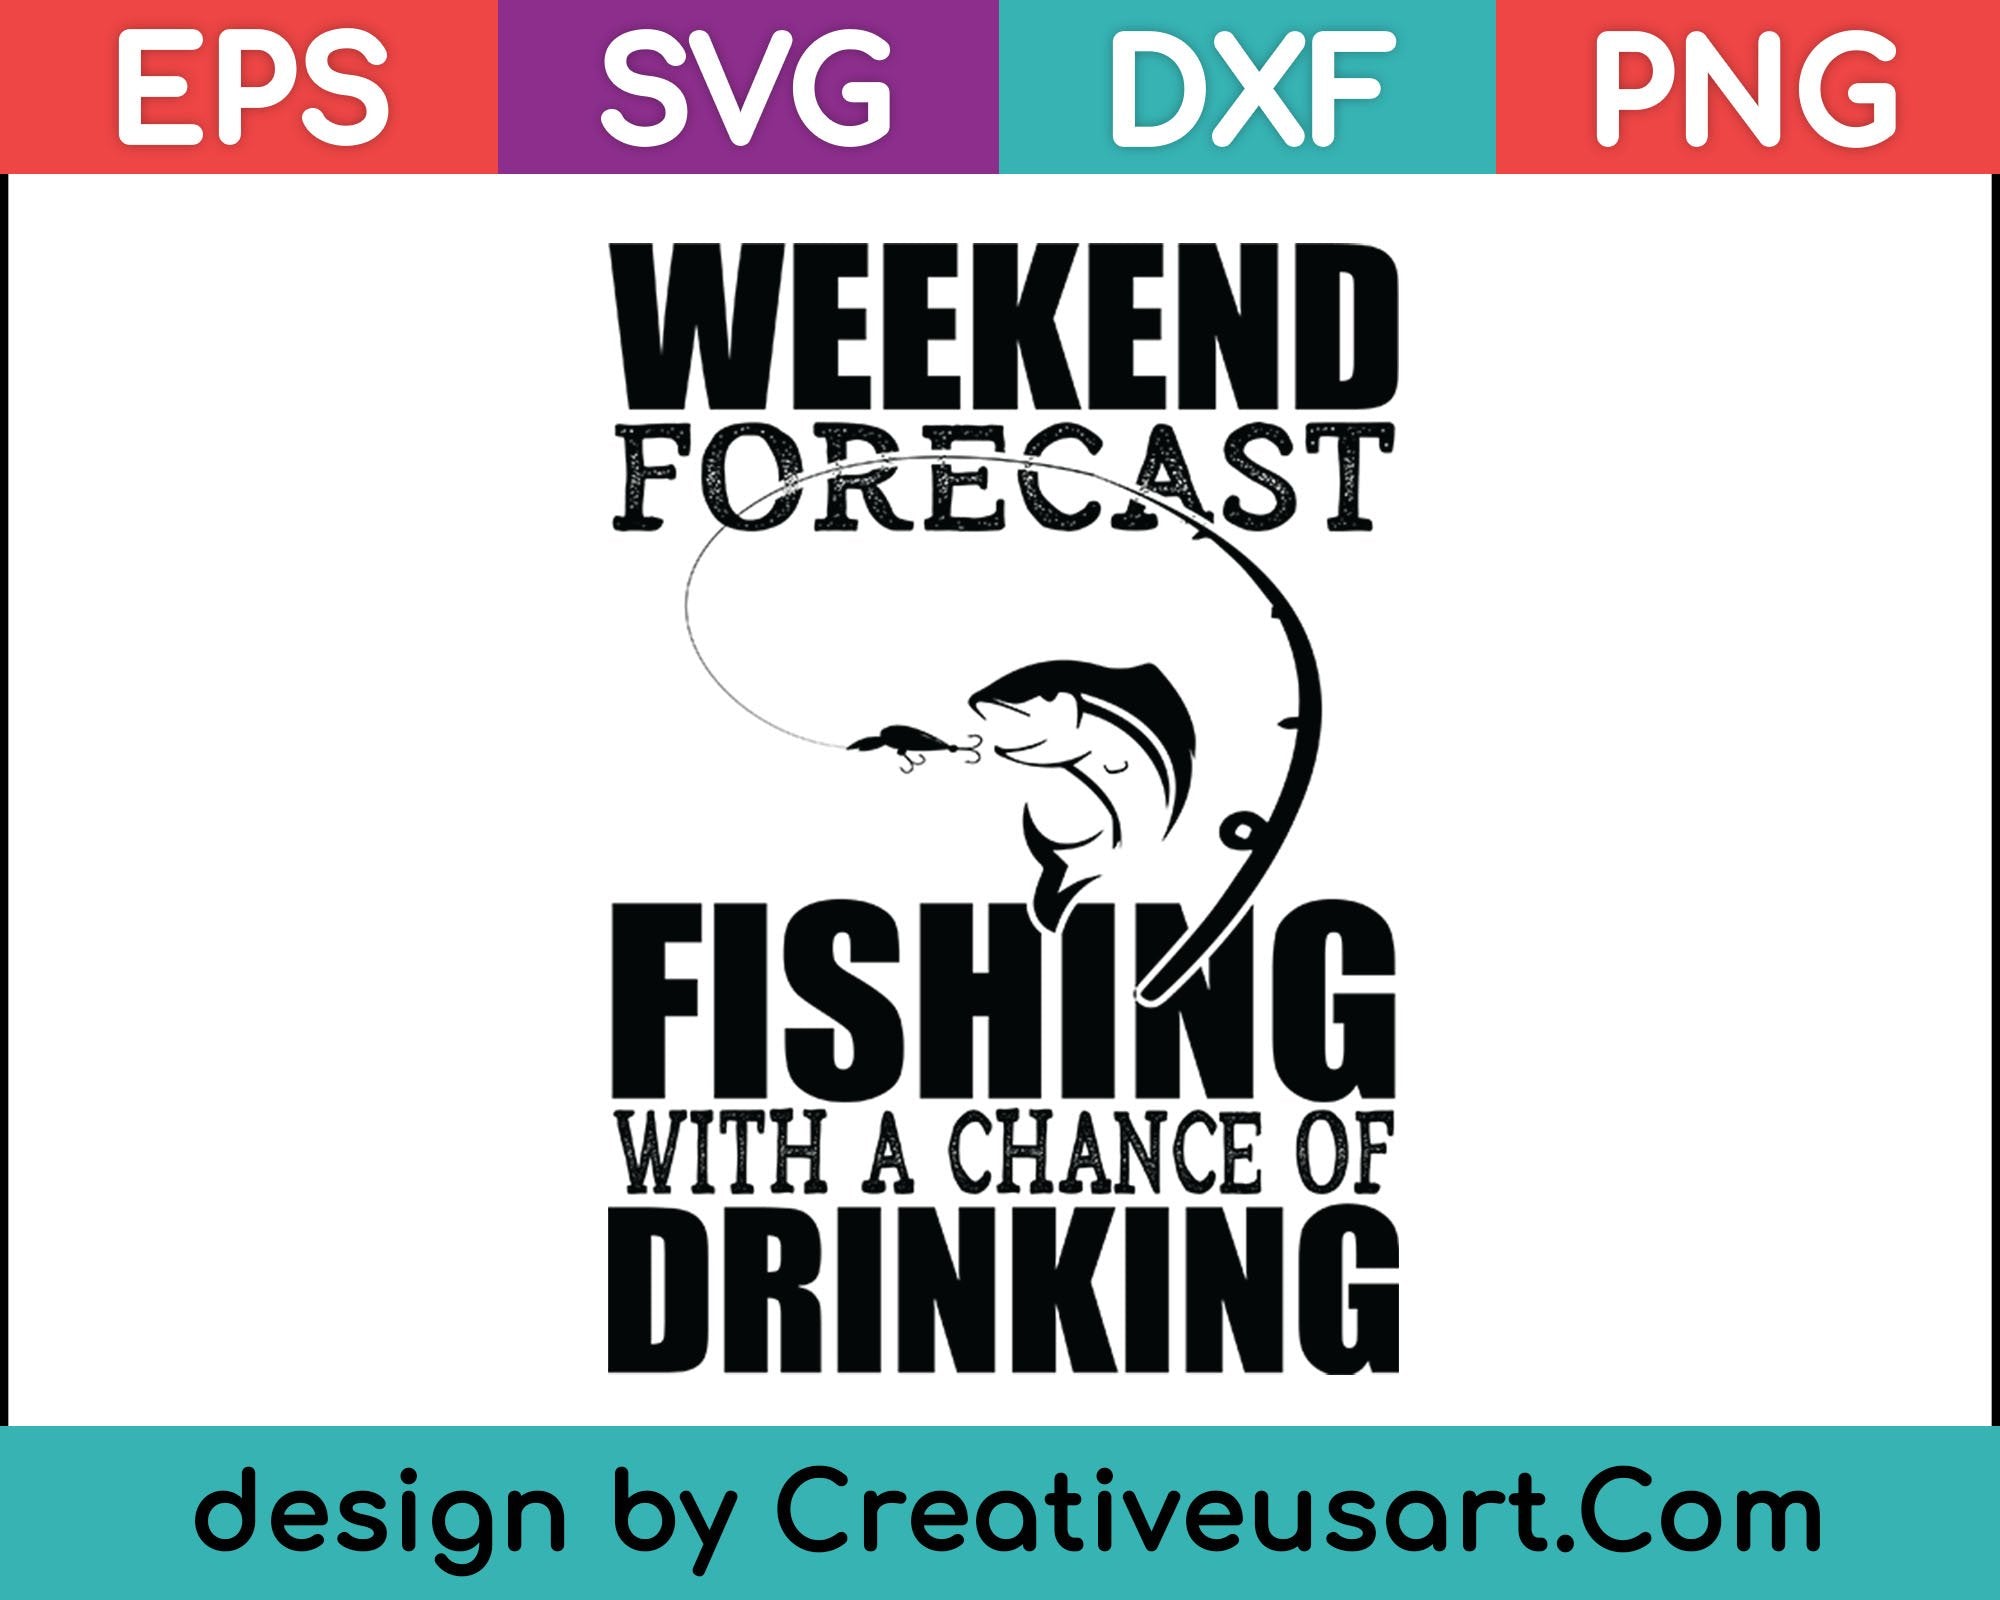 Download Weekend Forecast Fishing With A Chance Of Drinking Svg Files Creativeusarts